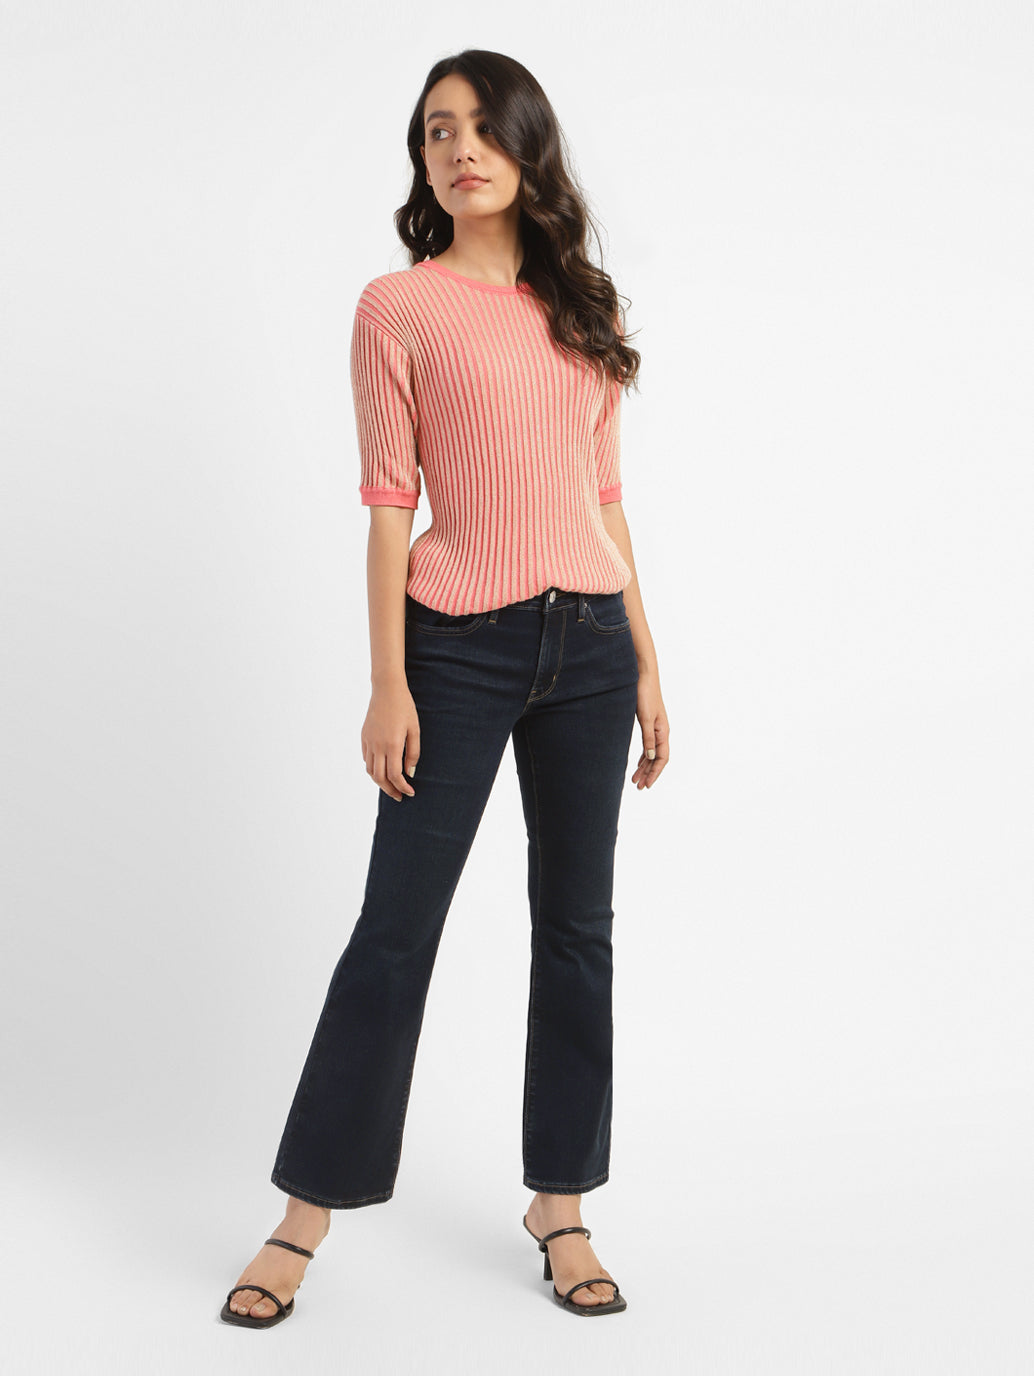 Women's 715 Bootcut Jeans – Levis India Store